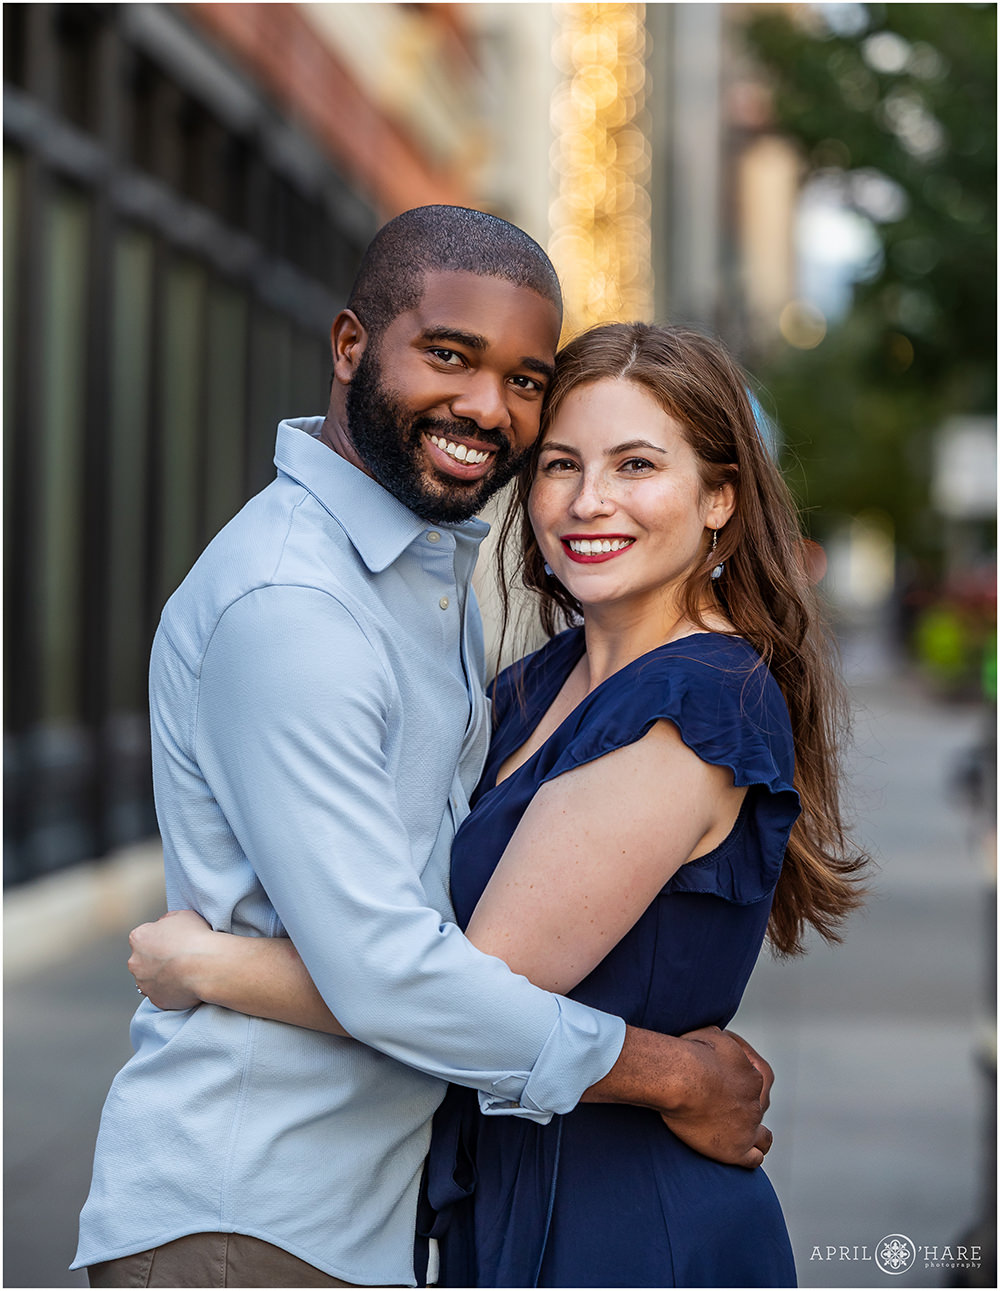 Pretty engagement photo in downtown Denver Colorado